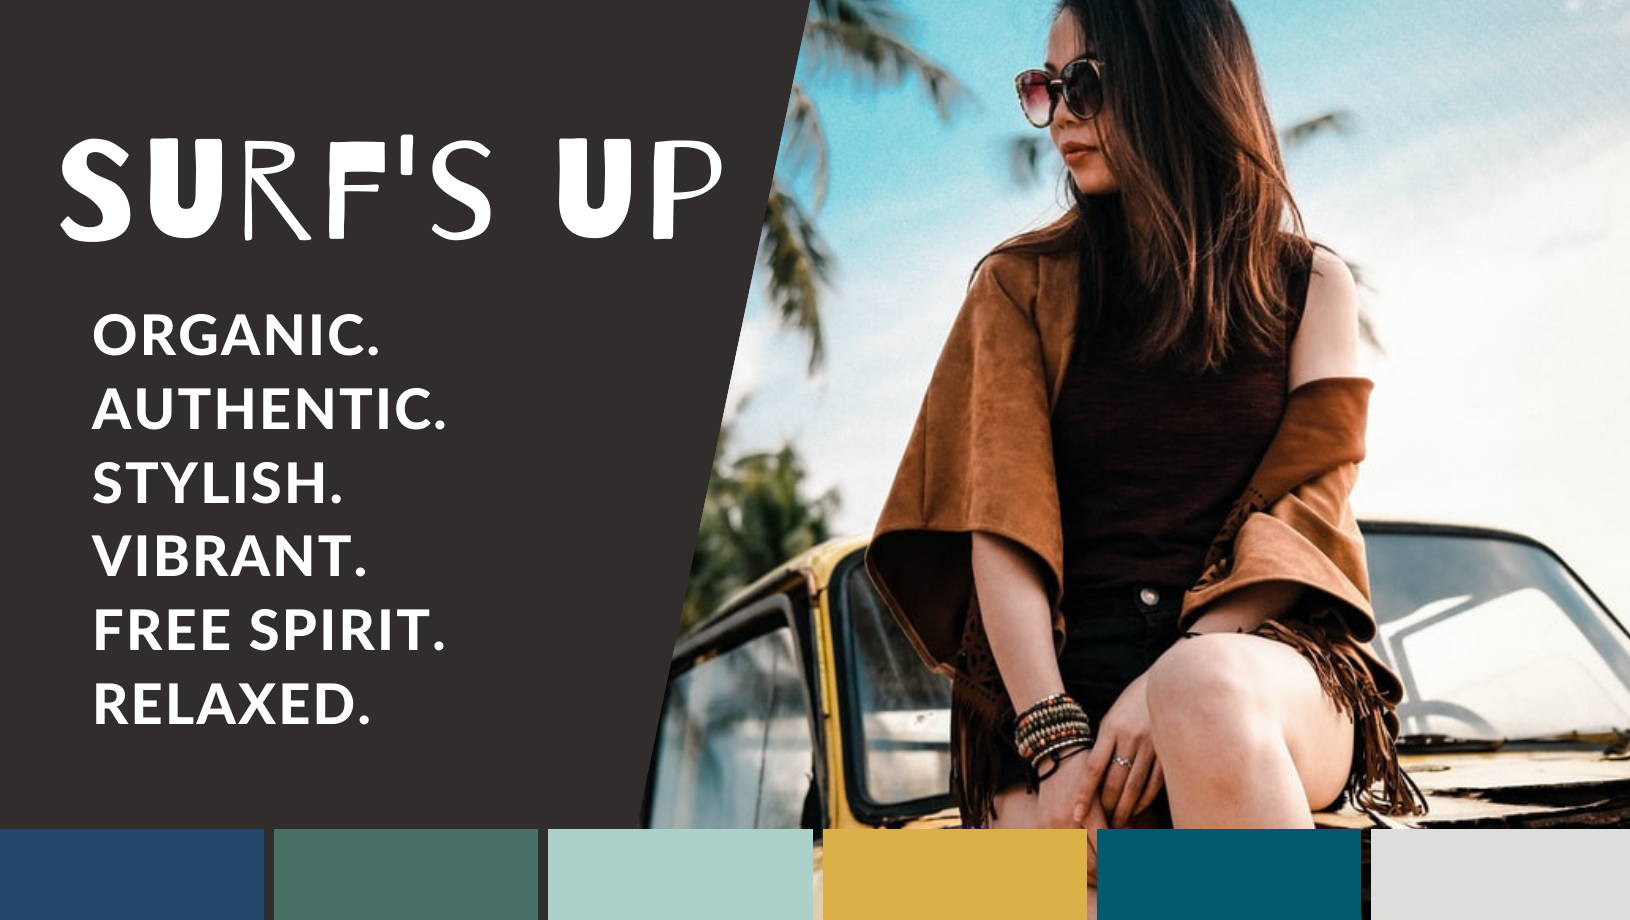 Surf's Up Vibe | Inspiration - We Are Stellar Designs